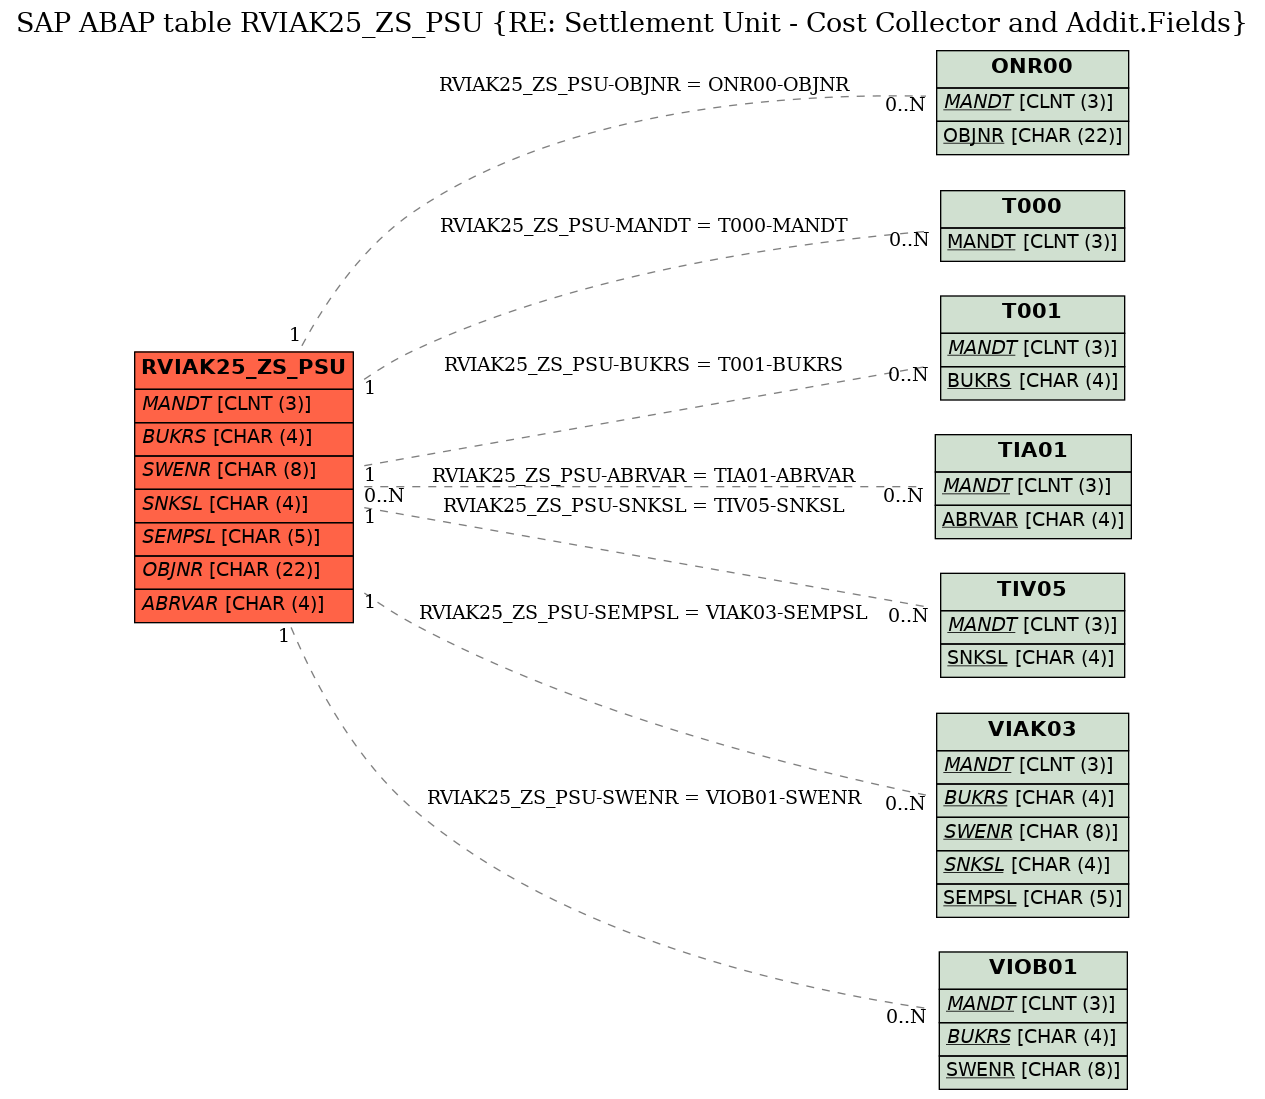 E-R Diagram for table RVIAK25_ZS_PSU (RE: Settlement Unit - Cost Collector and Addit.Fields)